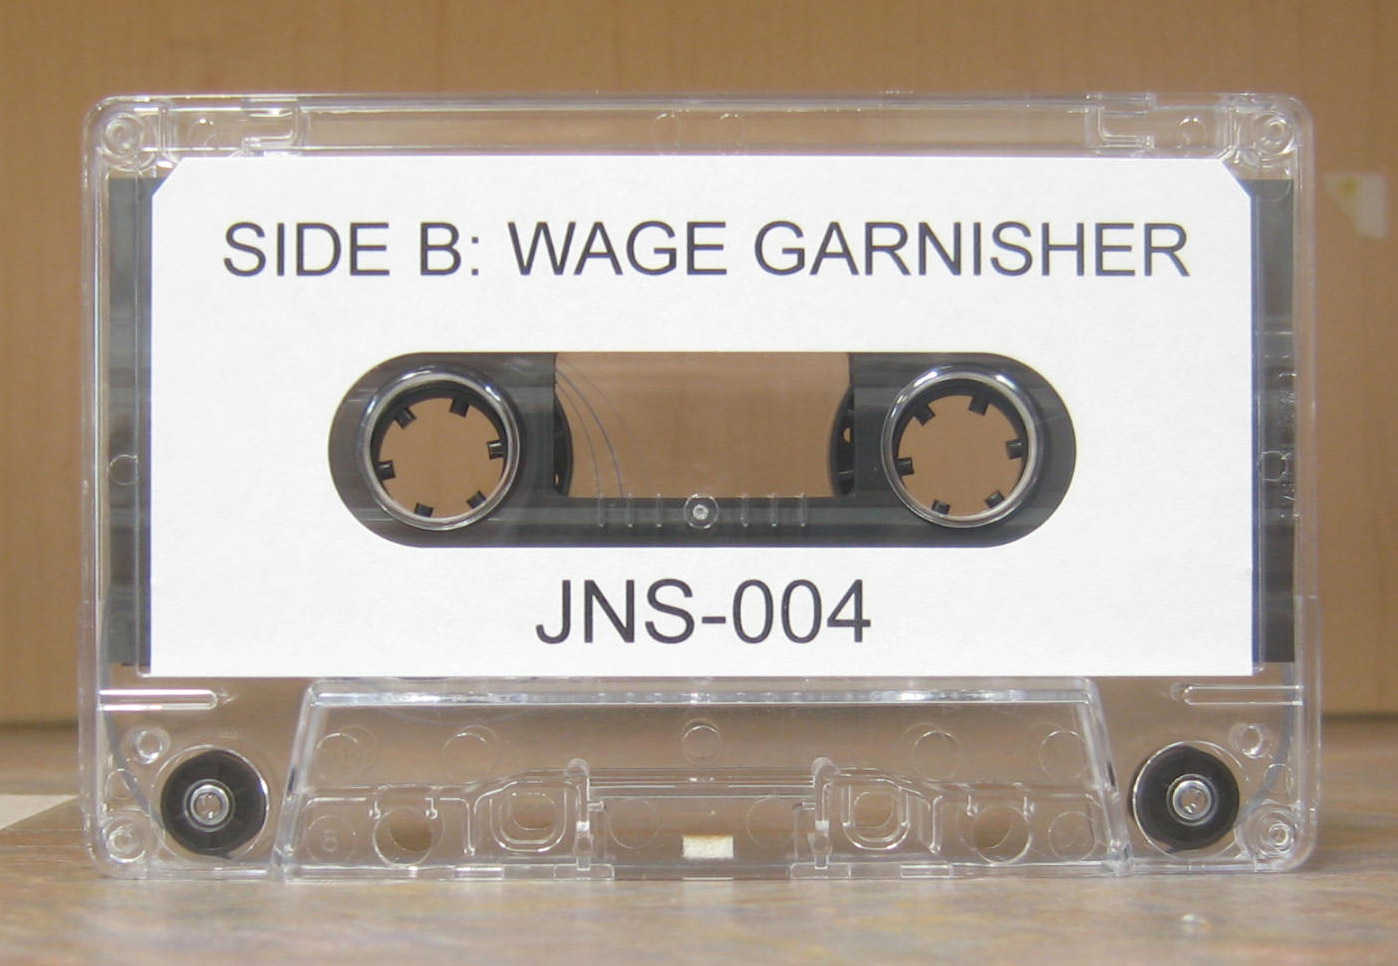 audio cassette with paper label titled Wage Garnisher